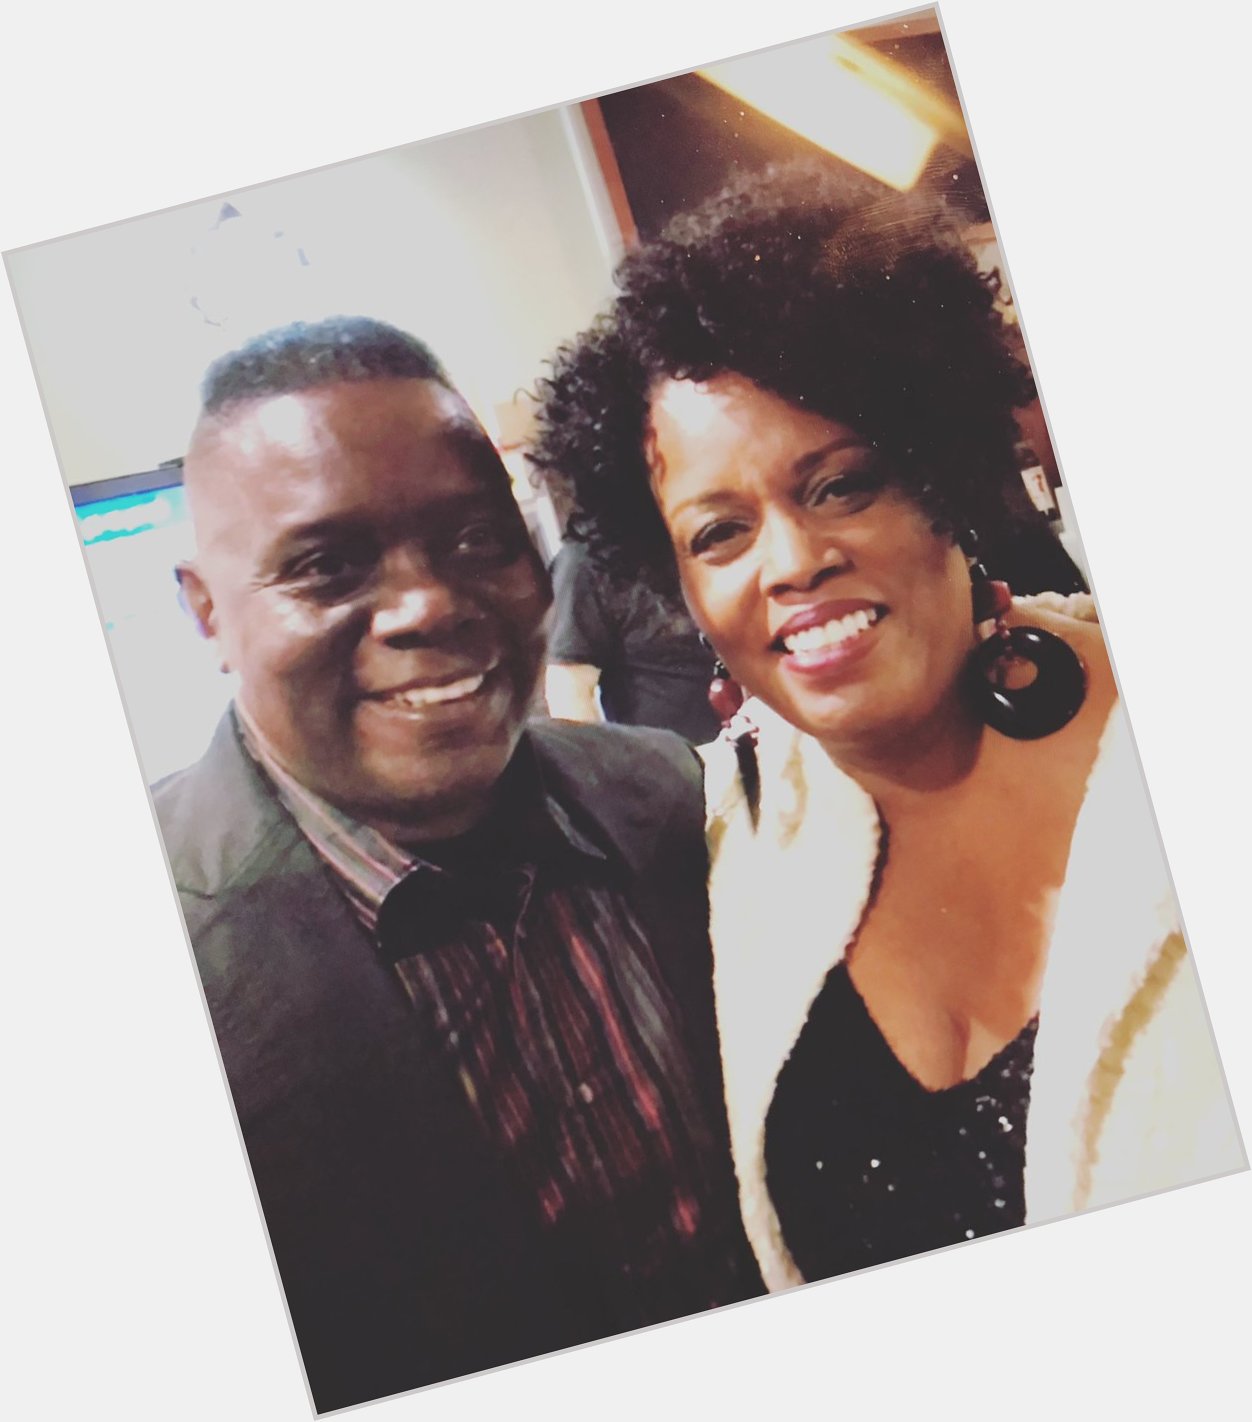 A Very Happy Birthday to my Hometown songstress, the Great Dianne Reeves ...Have a Wonderful one...  P.B. 